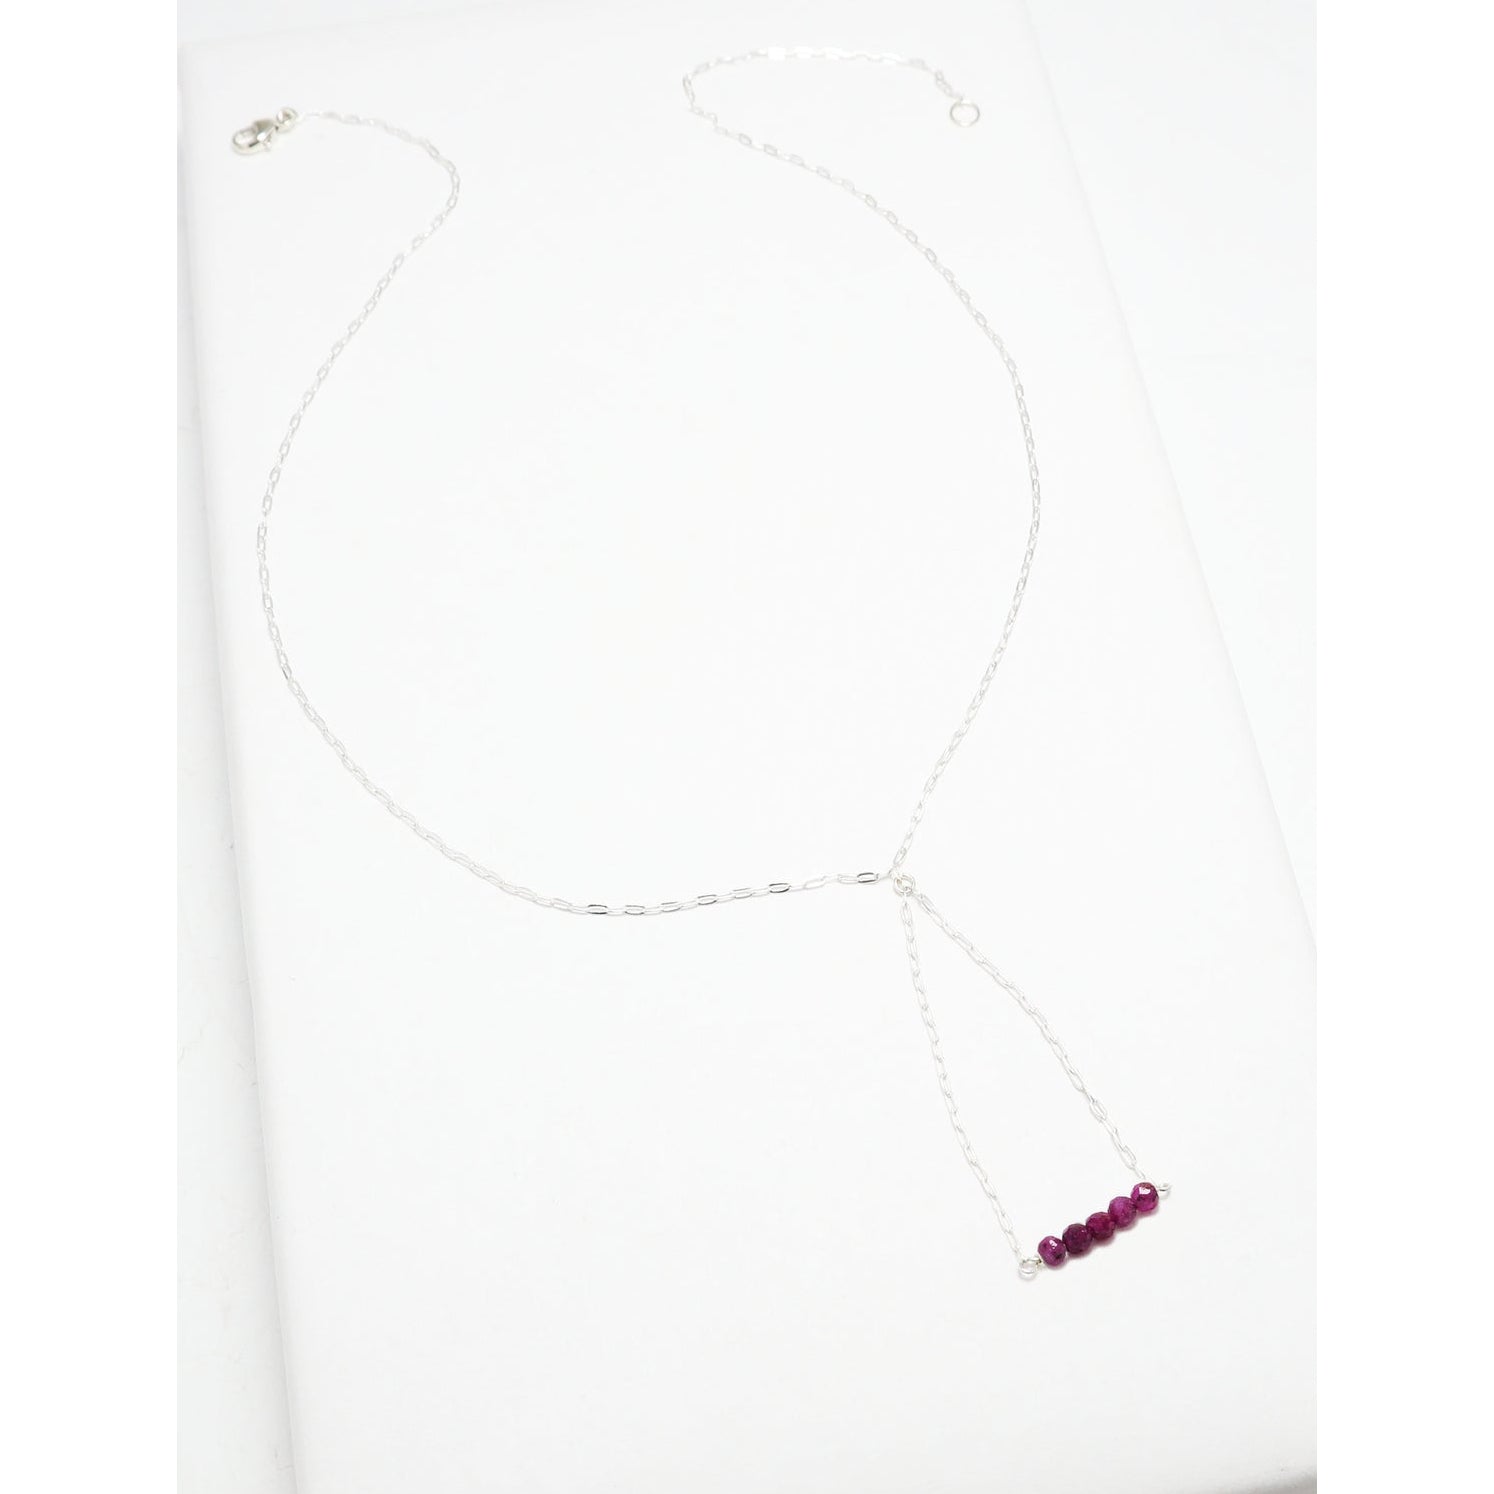 The July Necklace No. III